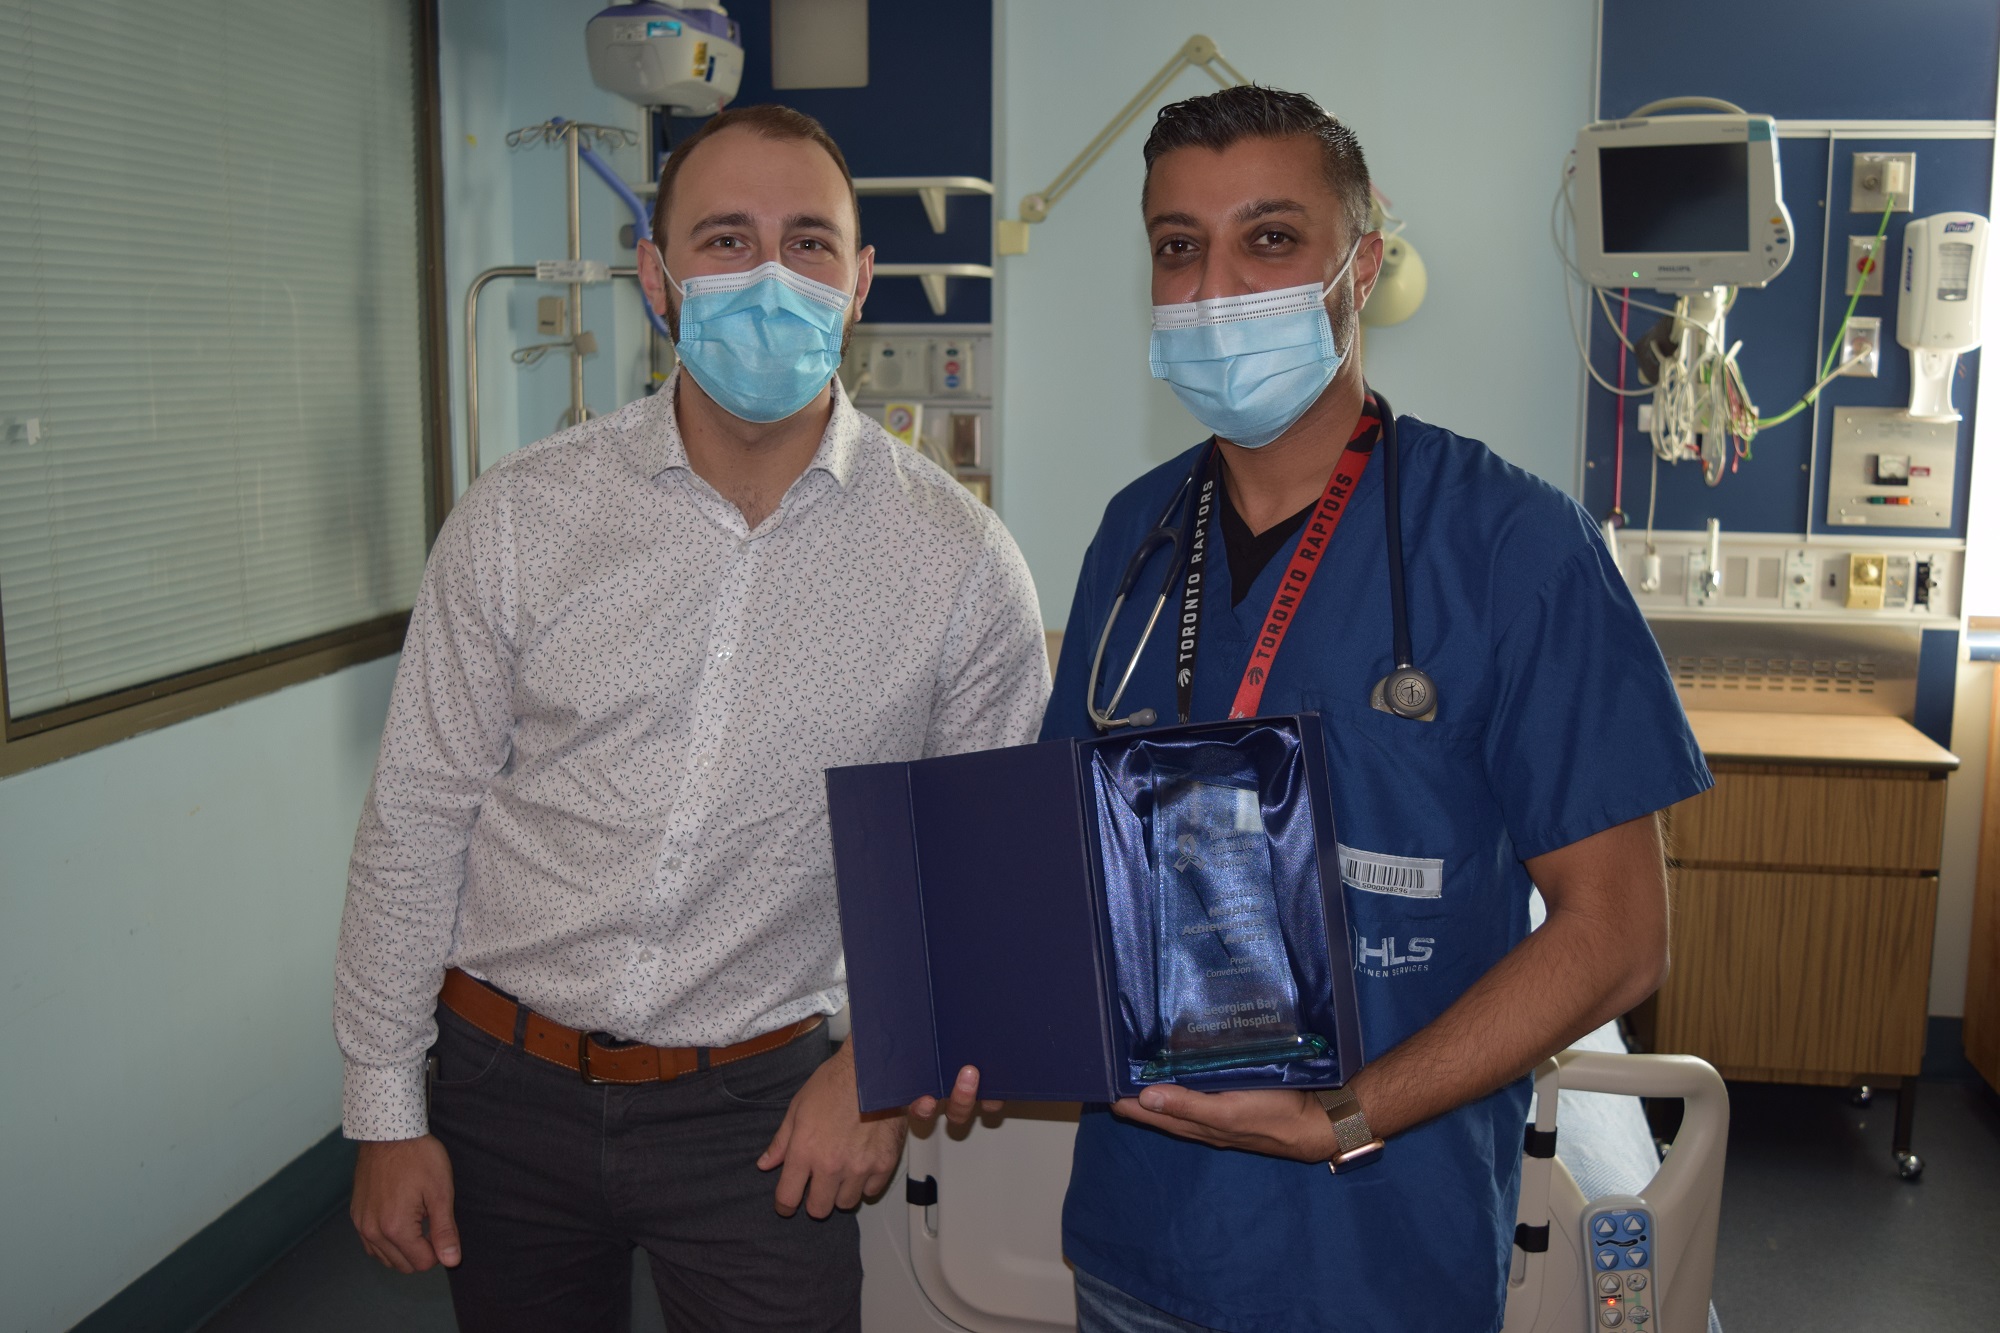 Dr. Tahir and Tyler Pilon. The doctor is holding a box with a certificate in it.